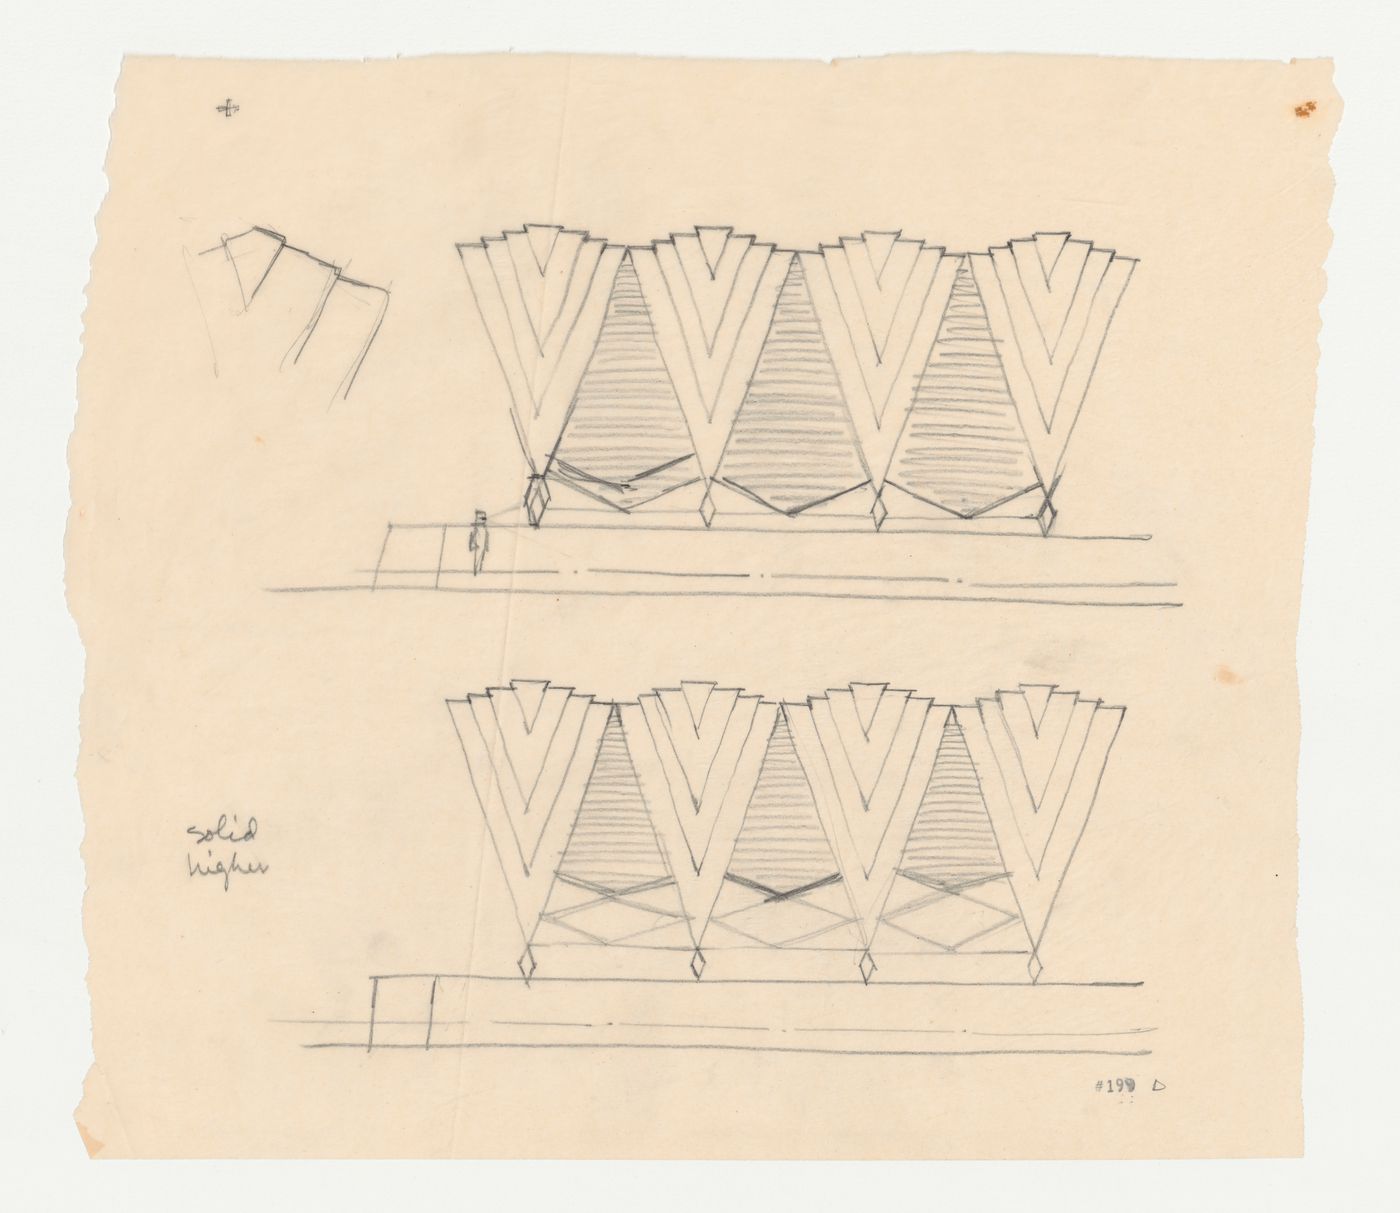 Two alternate sketch elevations for a chapel roof canopy based on the Wayfarers' Chapel design